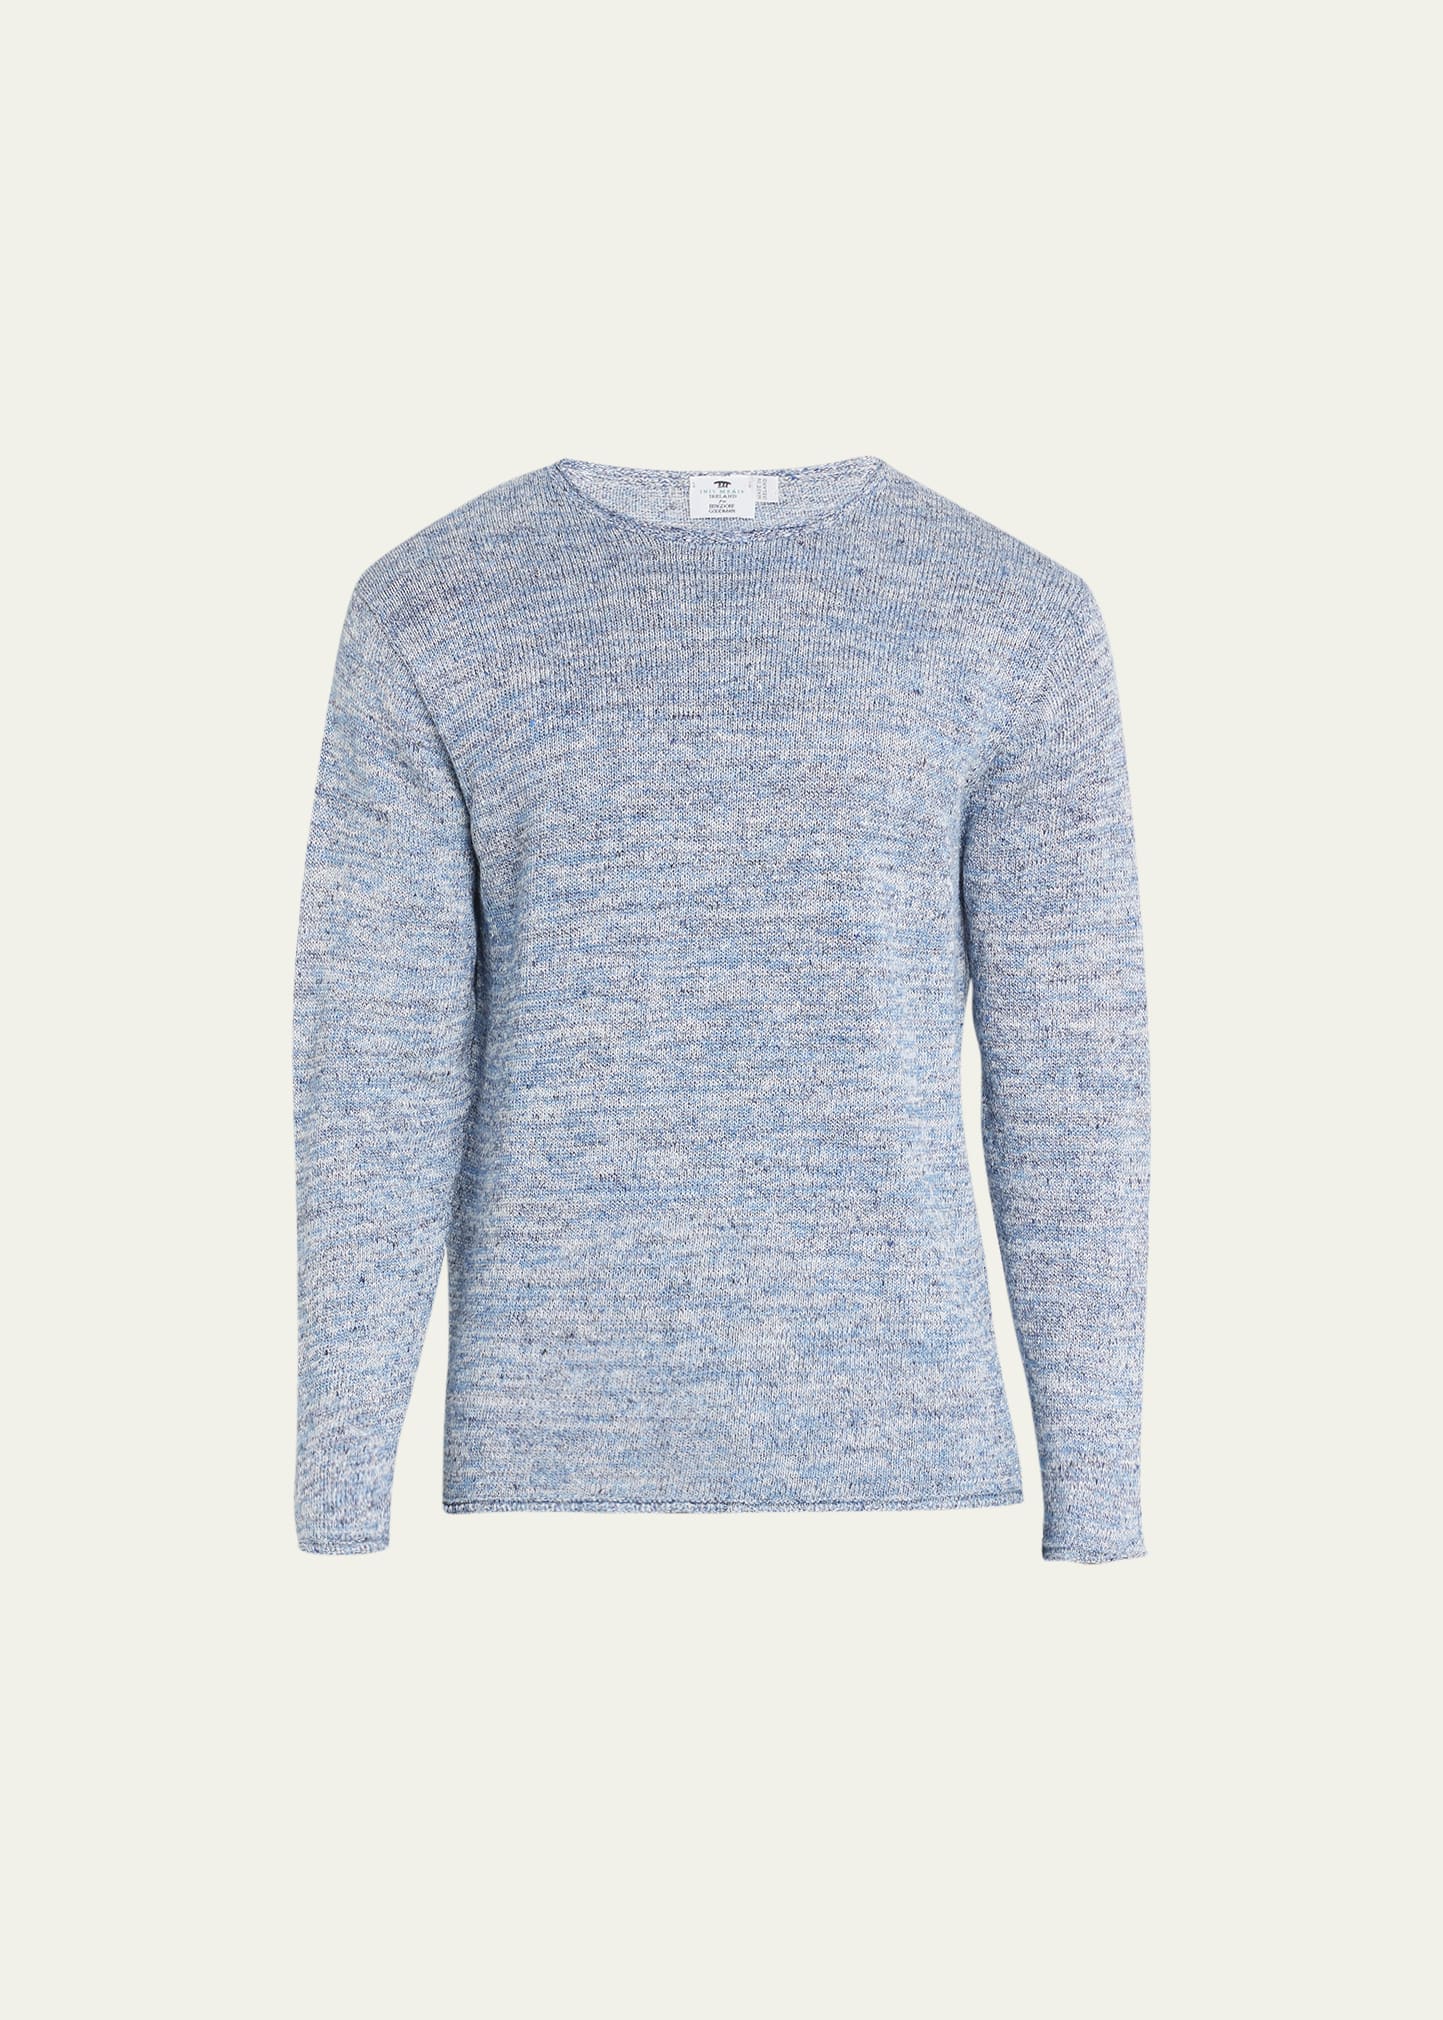 Inis Meain Men's Washed Linen Crewneck Sweater